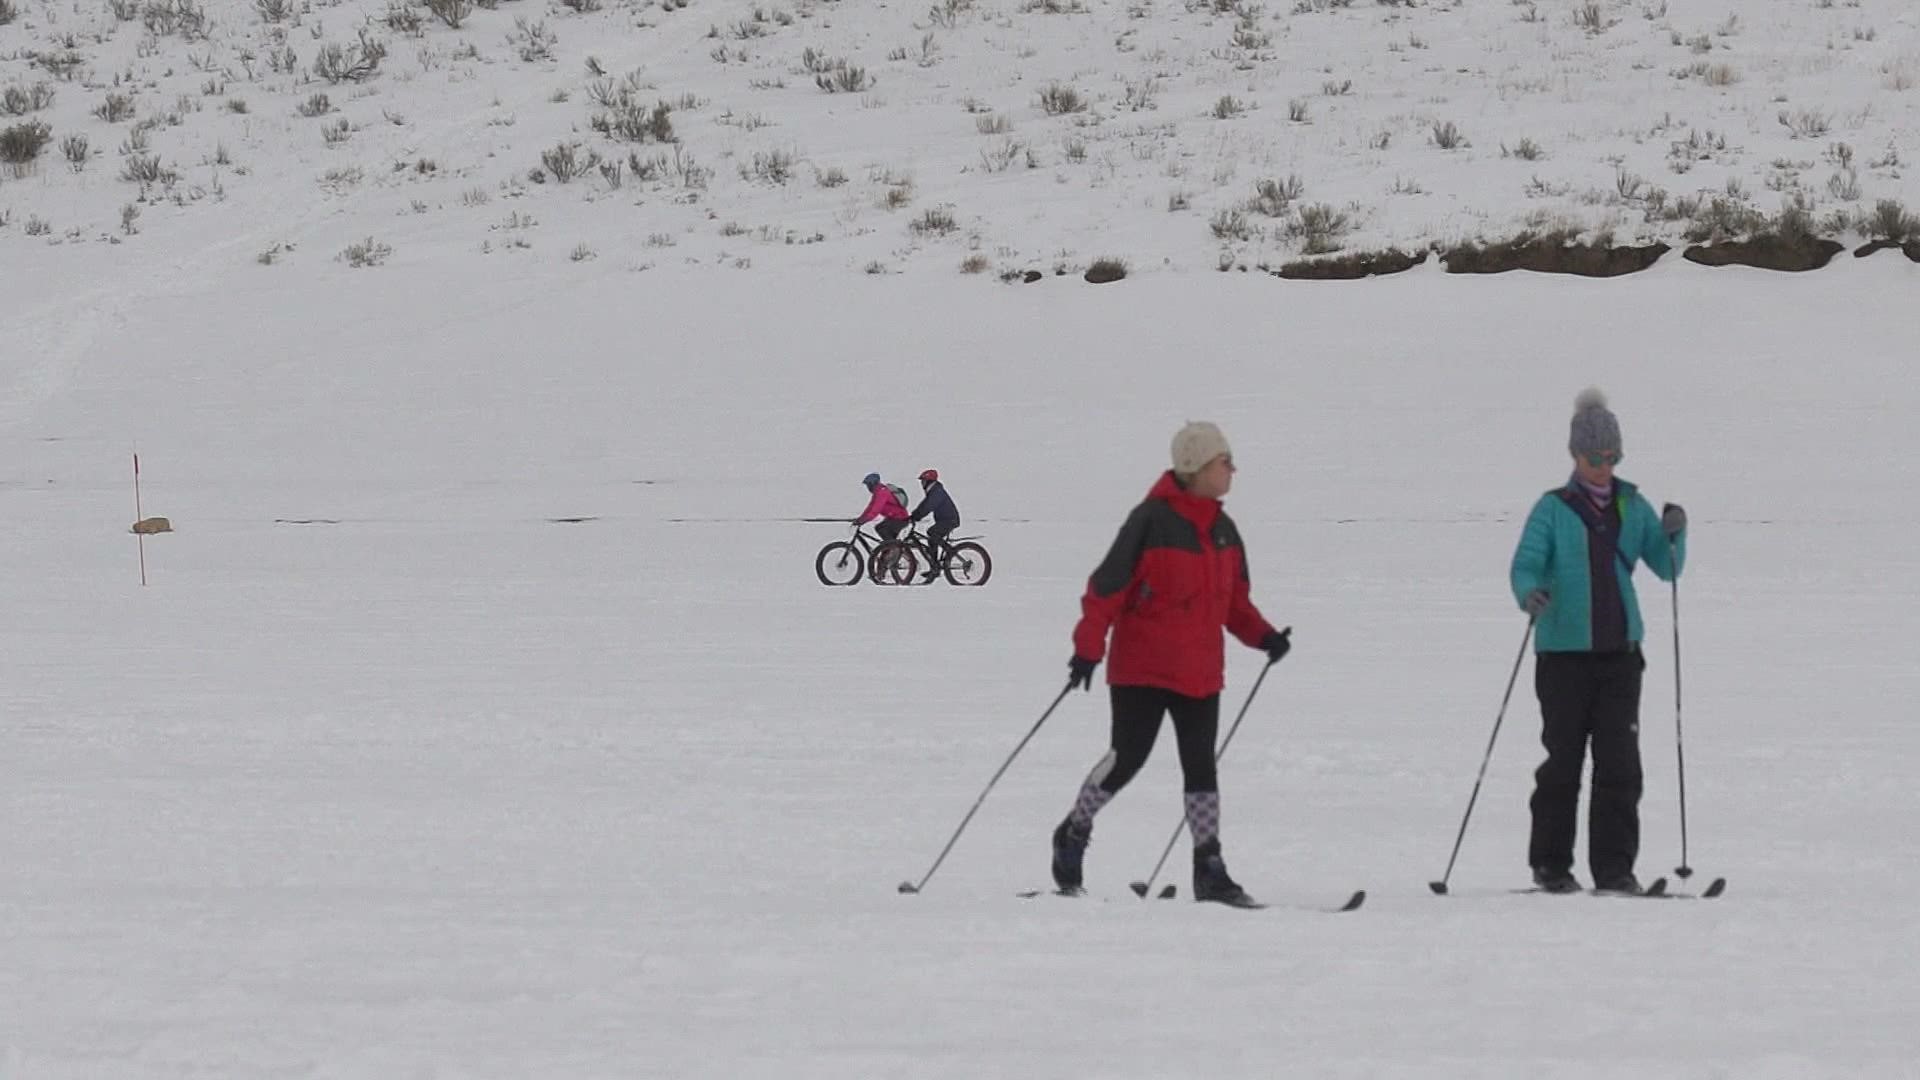 A new trail system loops around the lake letting people cross country ski, snowshoe and hike across the ice and snow.